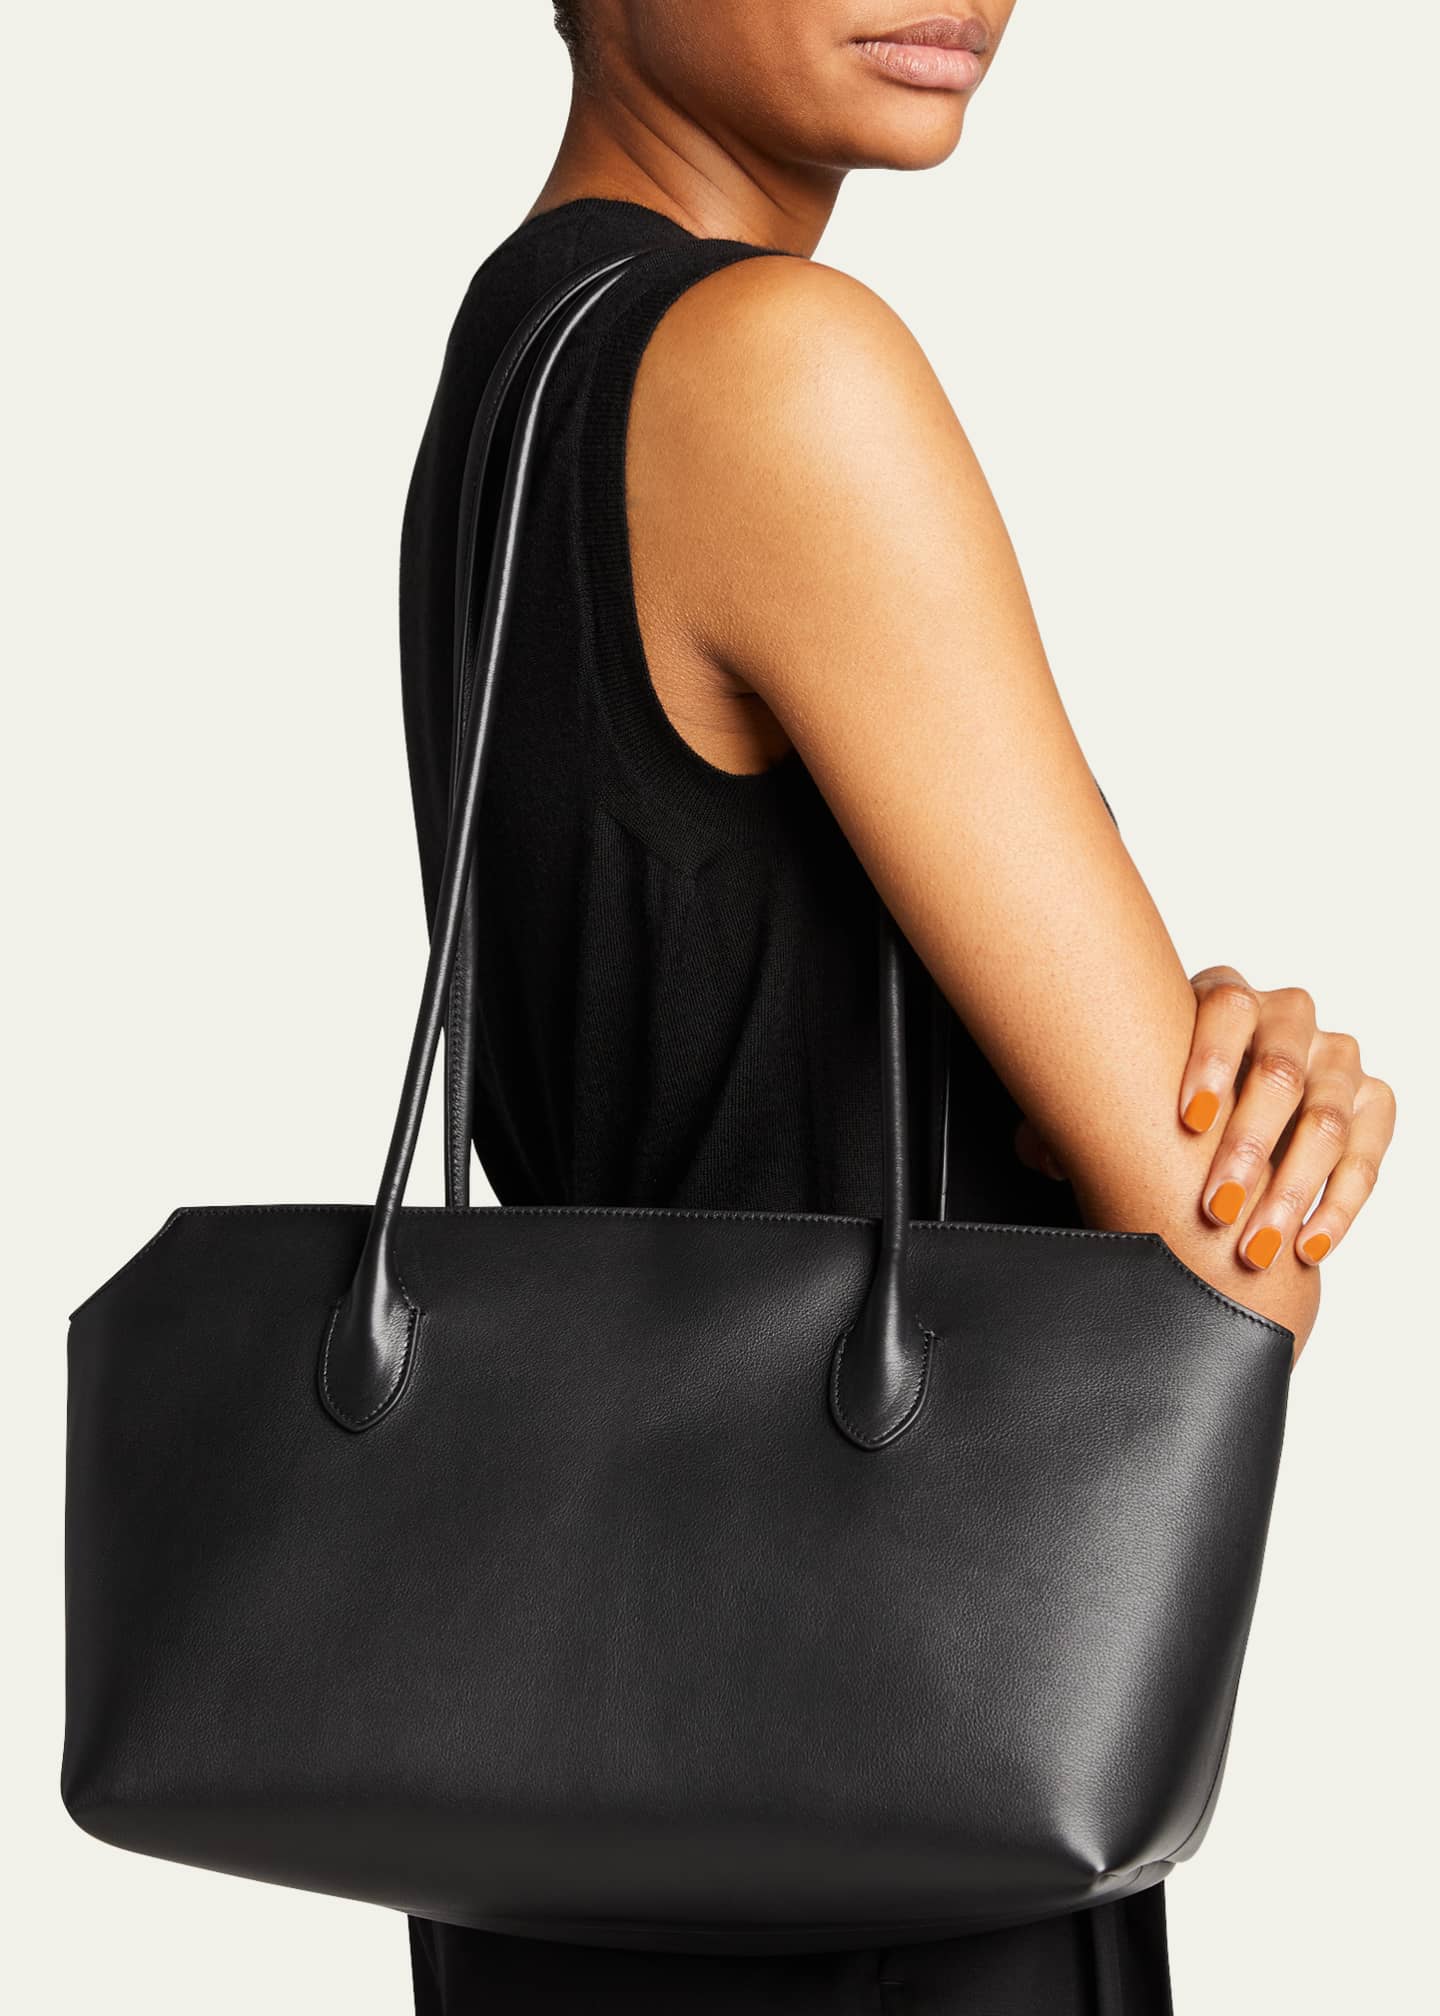 E W Leather Shoulder Bag in Black - The Row